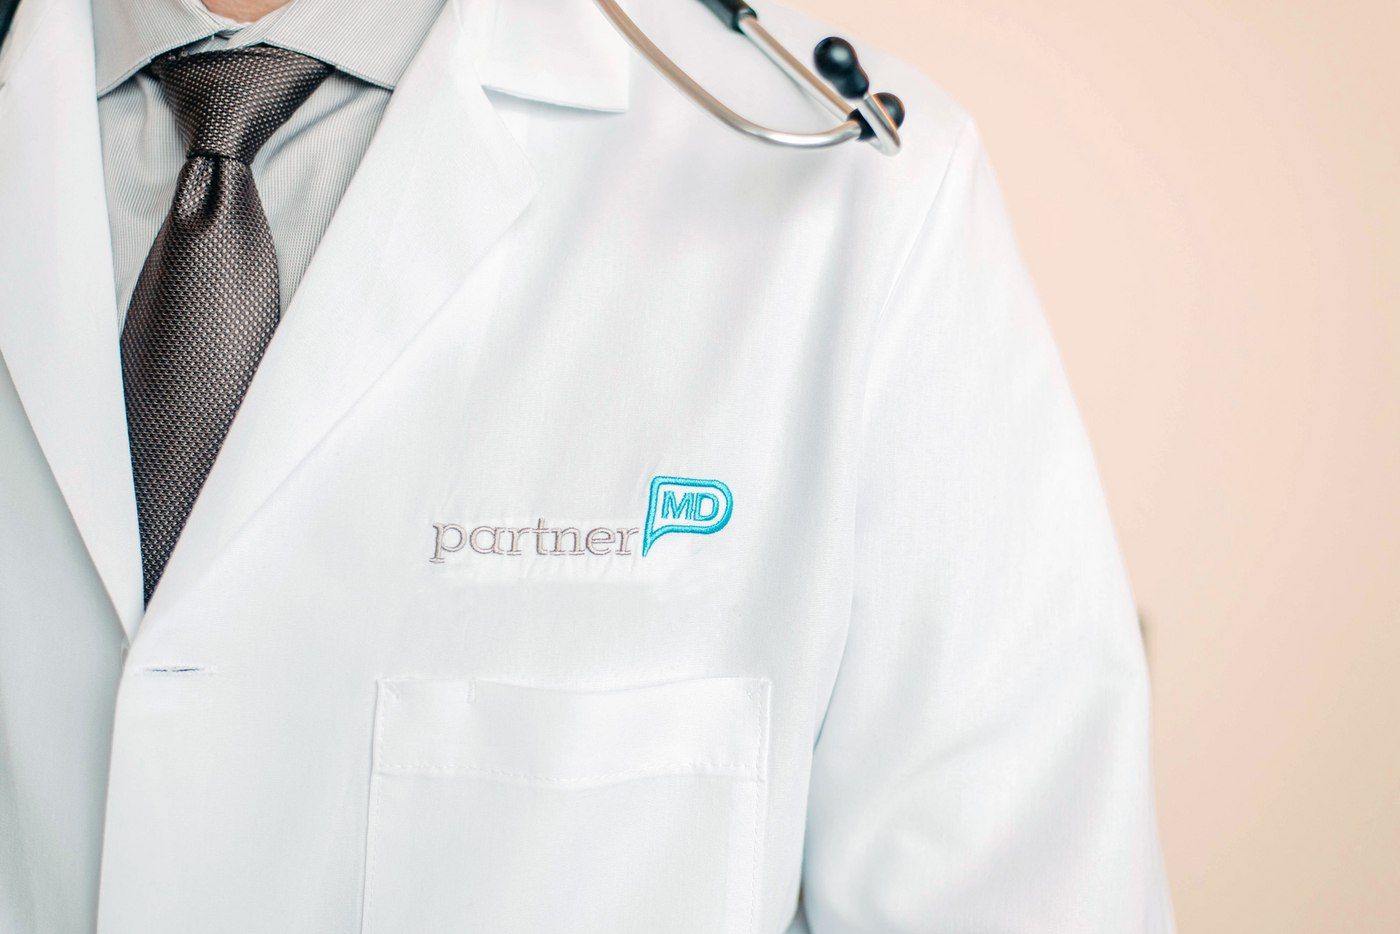 PartnerMD physician in a whitecoat